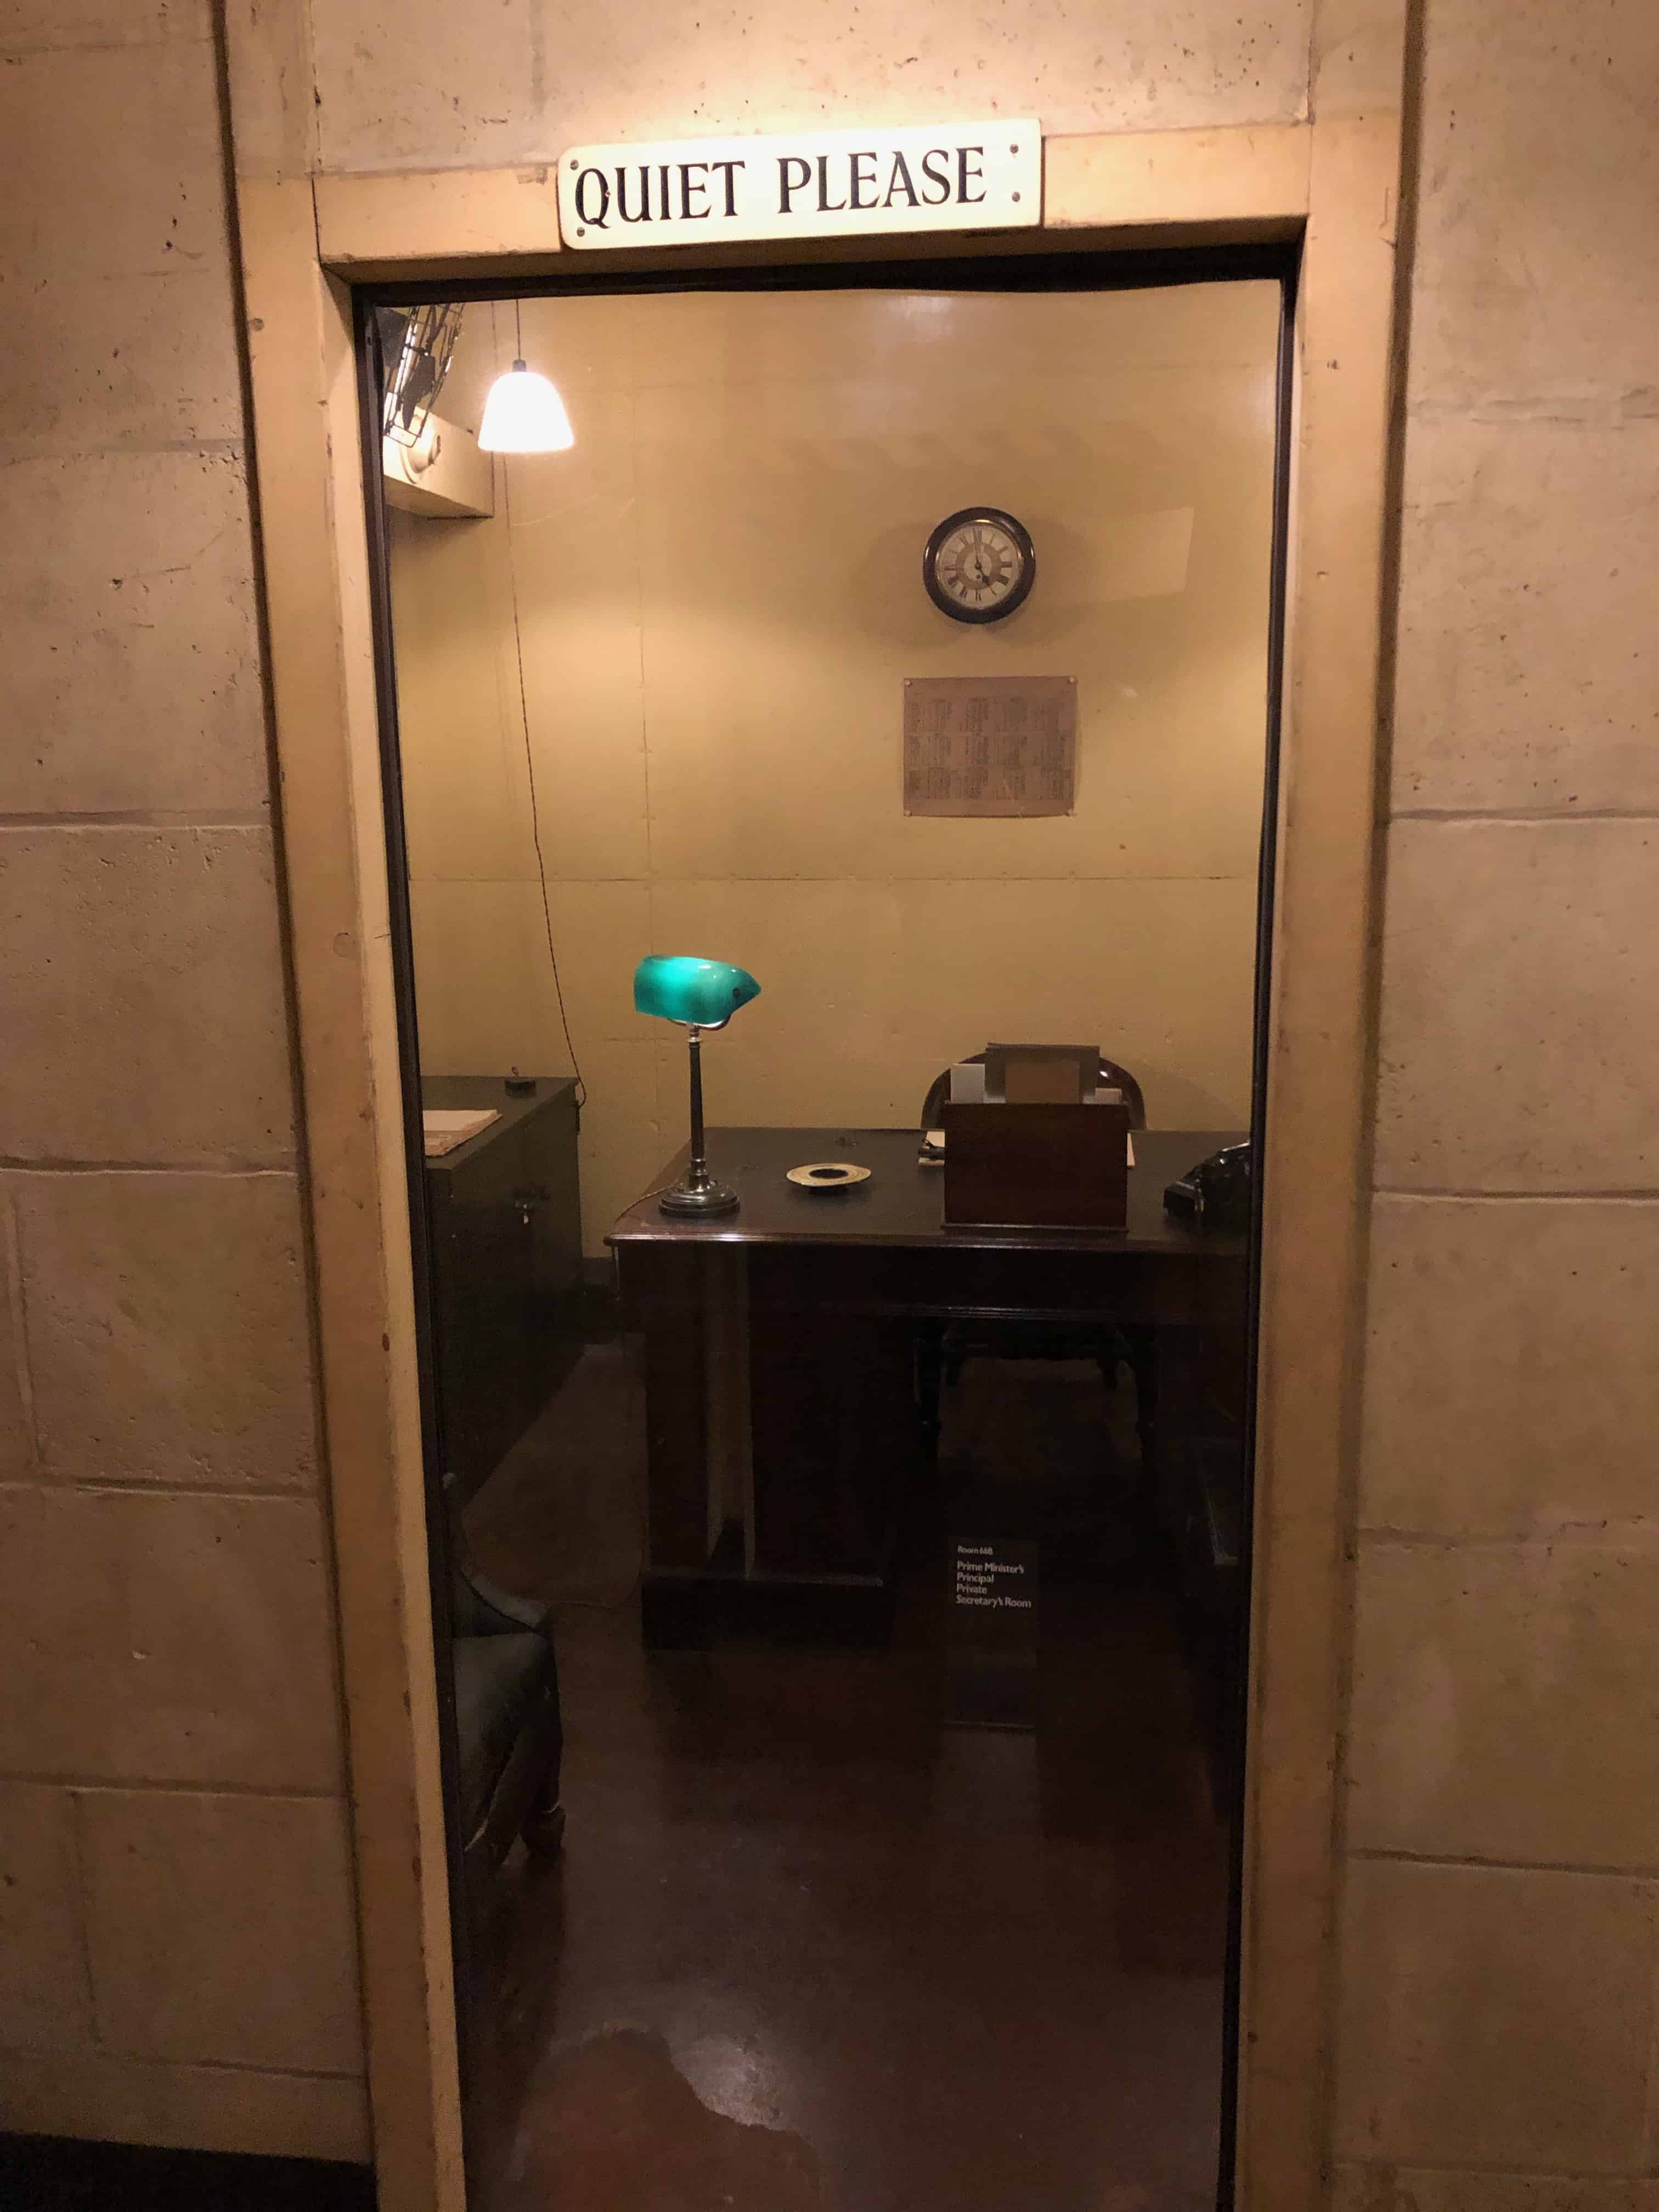 Prime Minister's Principal Private Secretary's Room at the Churchill War Rooms in London, England